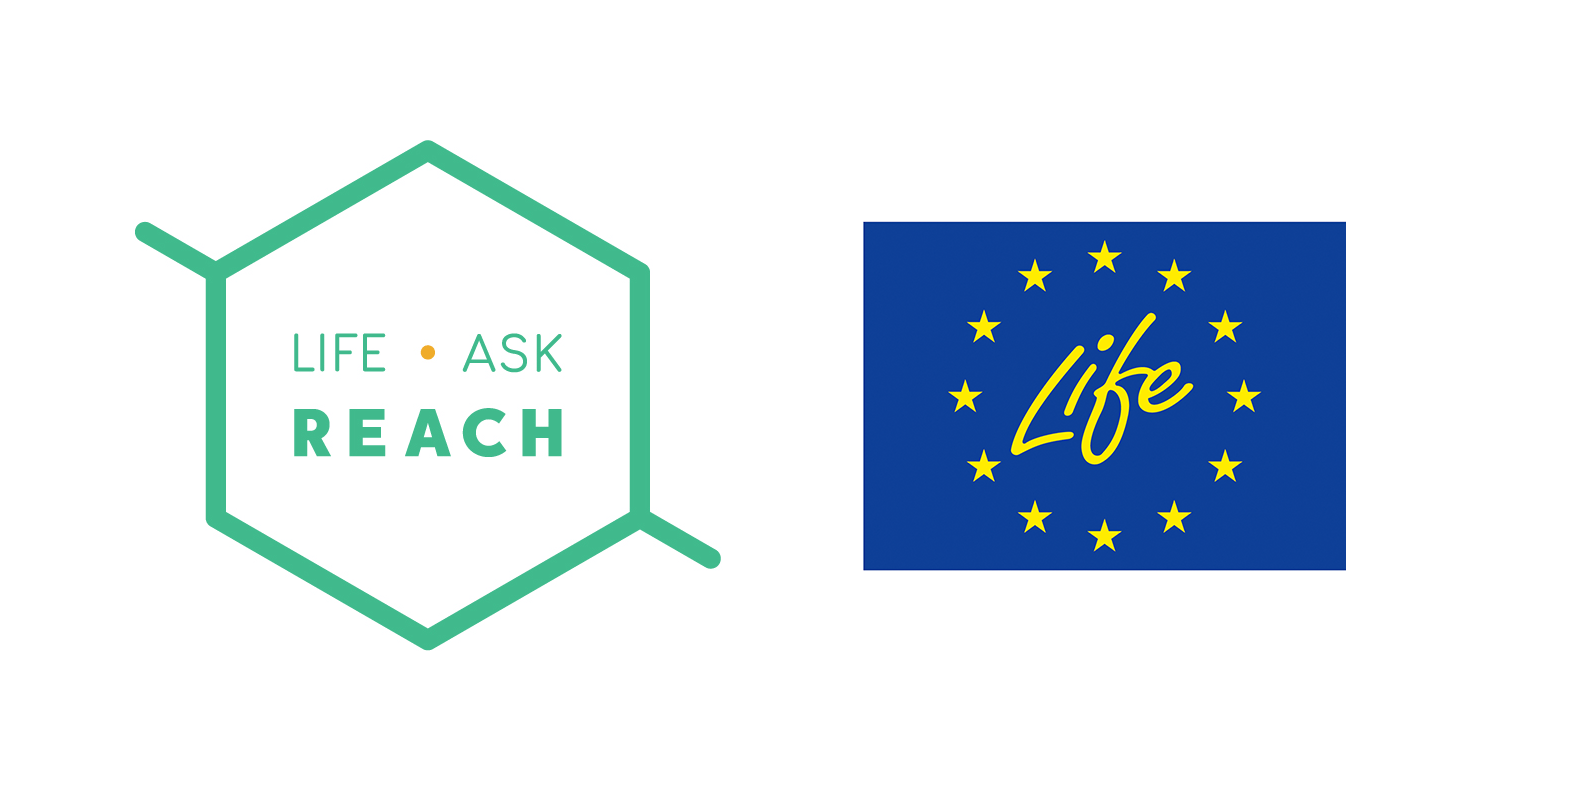 Ask Chemical Logo - Chemicals in articles: EU LIFE Projekt AskREACH started ...